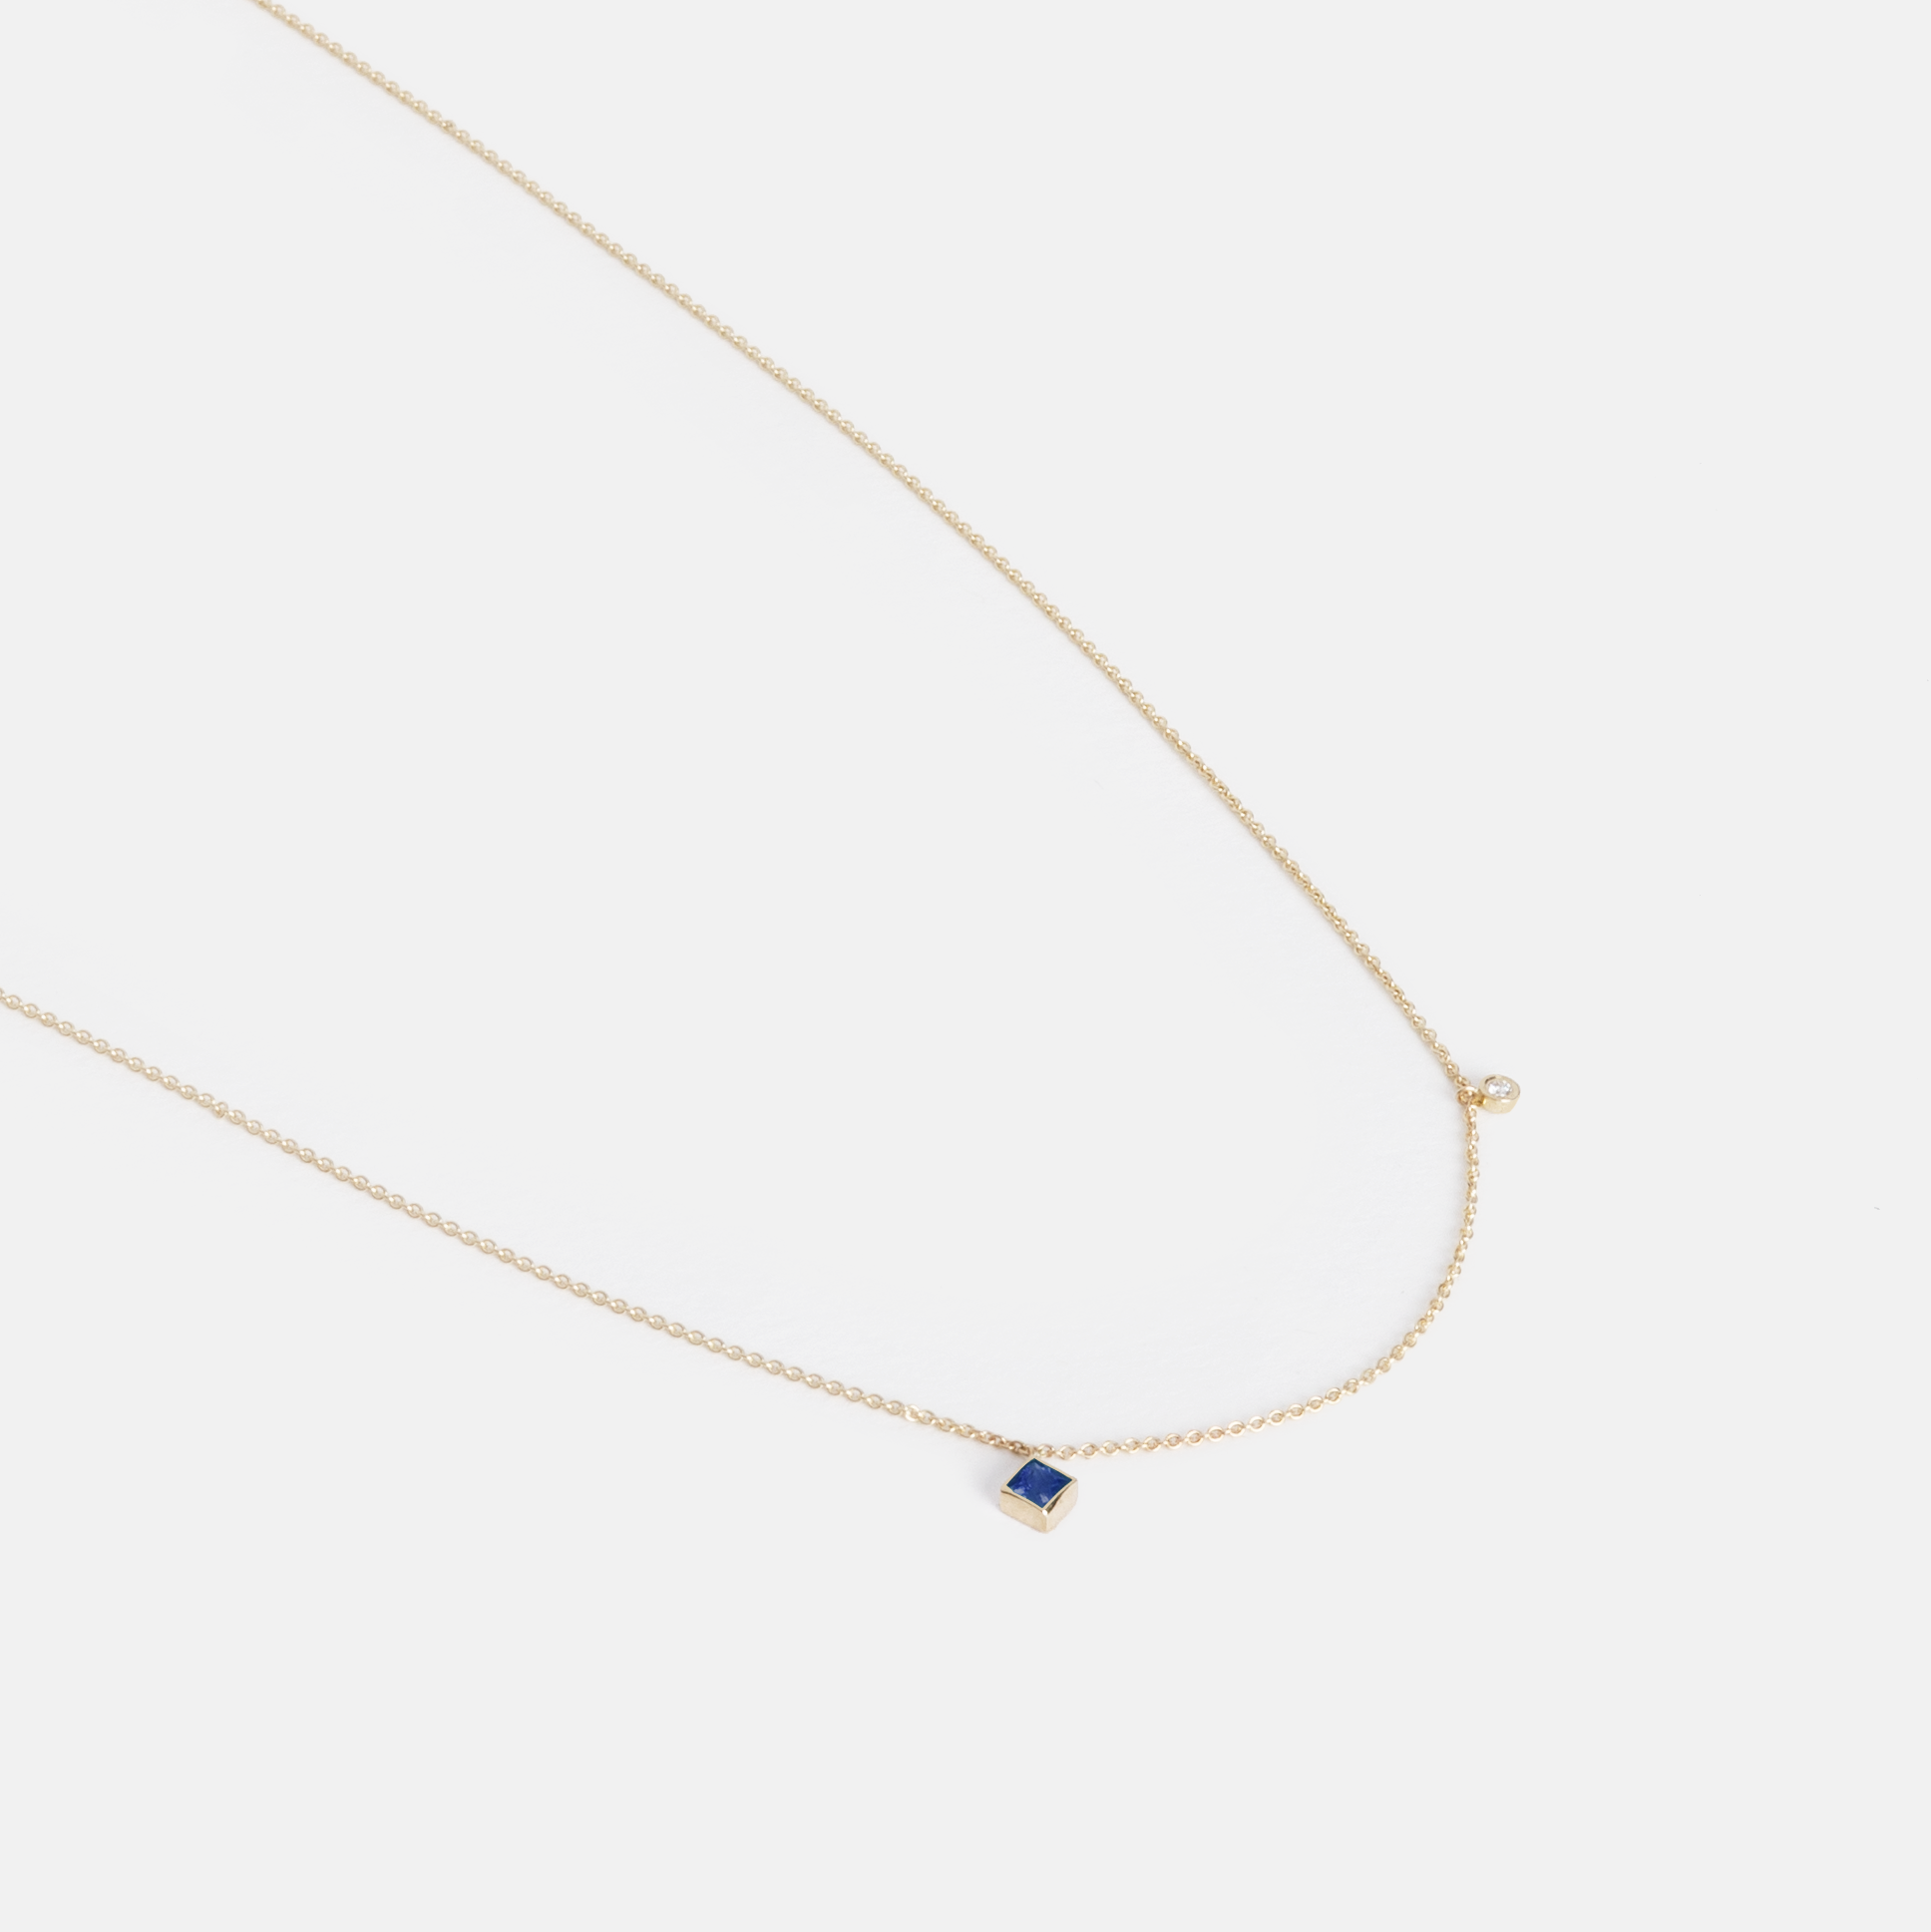 Ibi Cool Necklace in 14k Gold set with Sapphire and White Diamond By SHW Fine Jewelry NYC